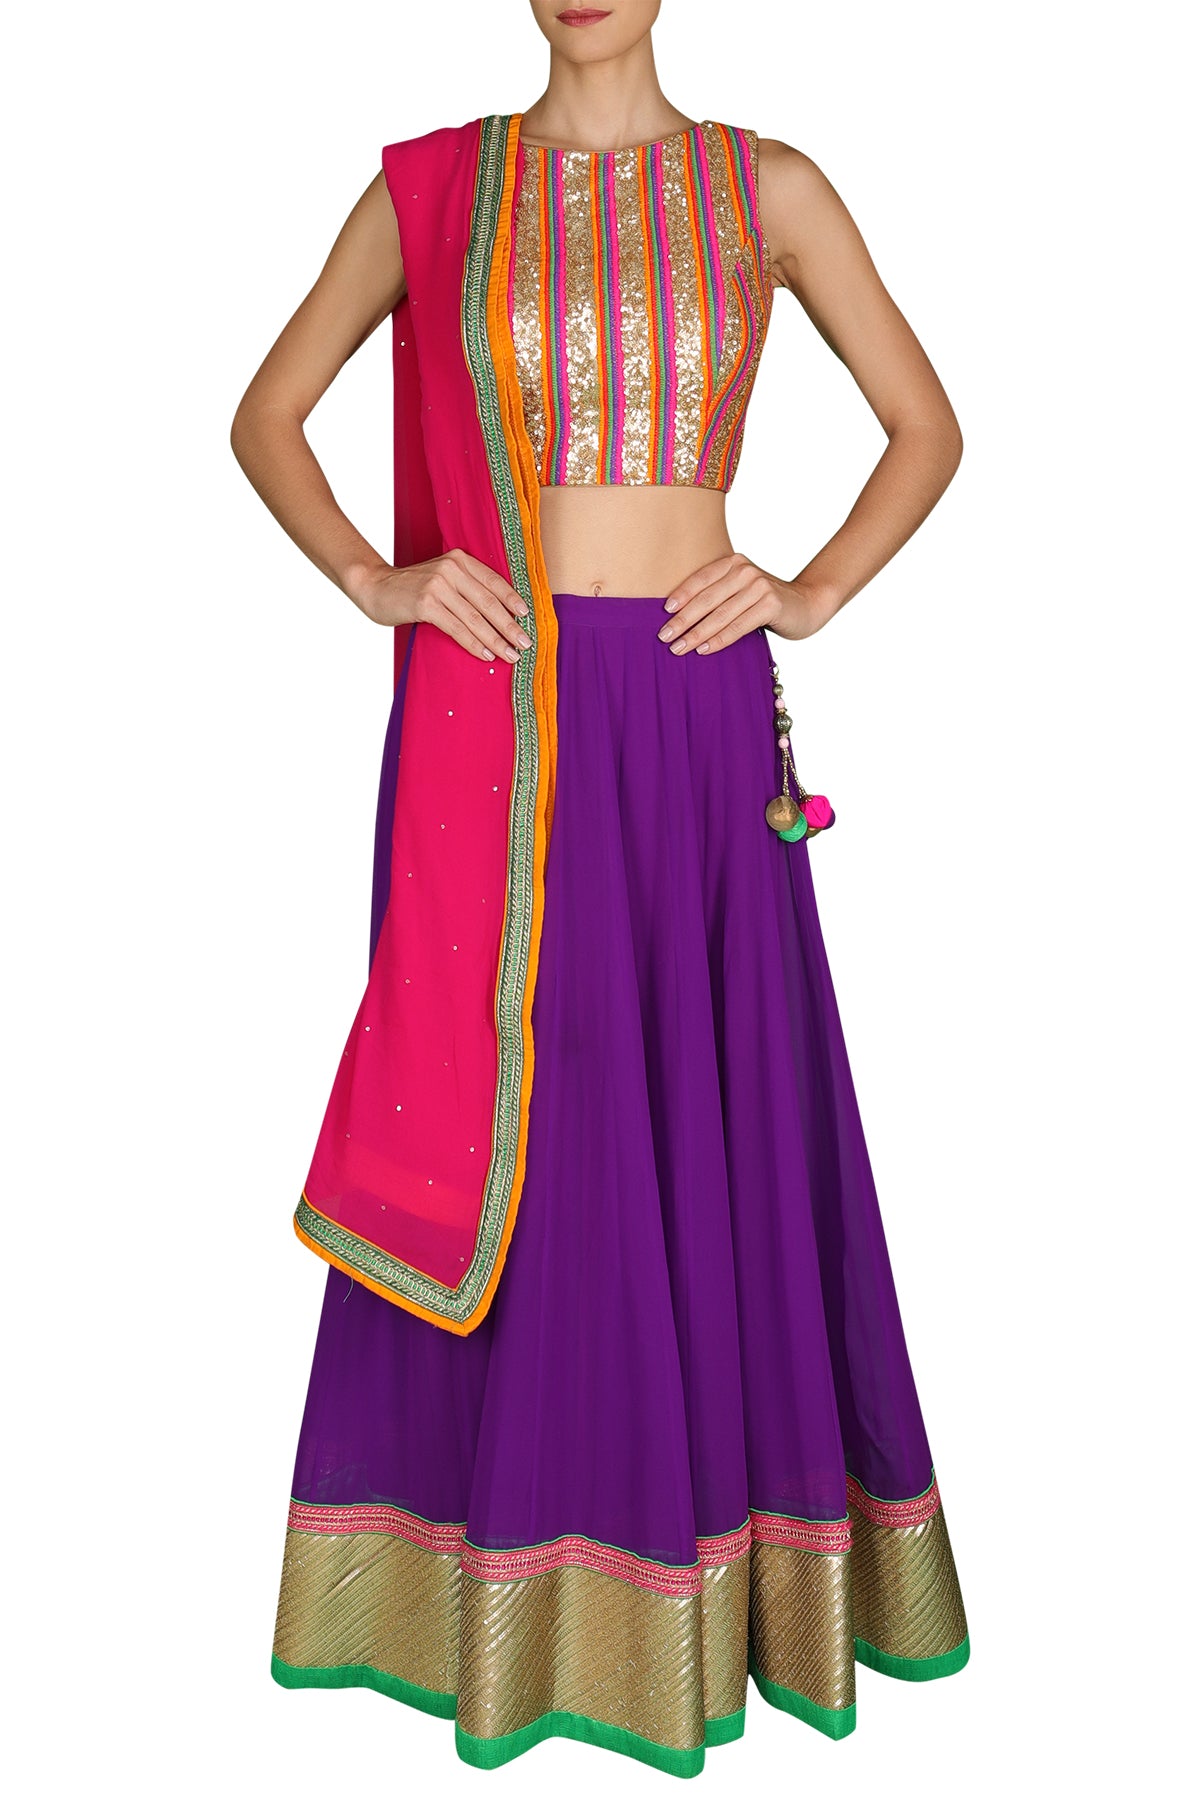 Lose yourself to the vibrant multi-colours of this vivacious wonder. Slip into its high neck sequin blouse with a futuristic feel and its purple georgette lehenga with a pink and orange shaded dupatta.